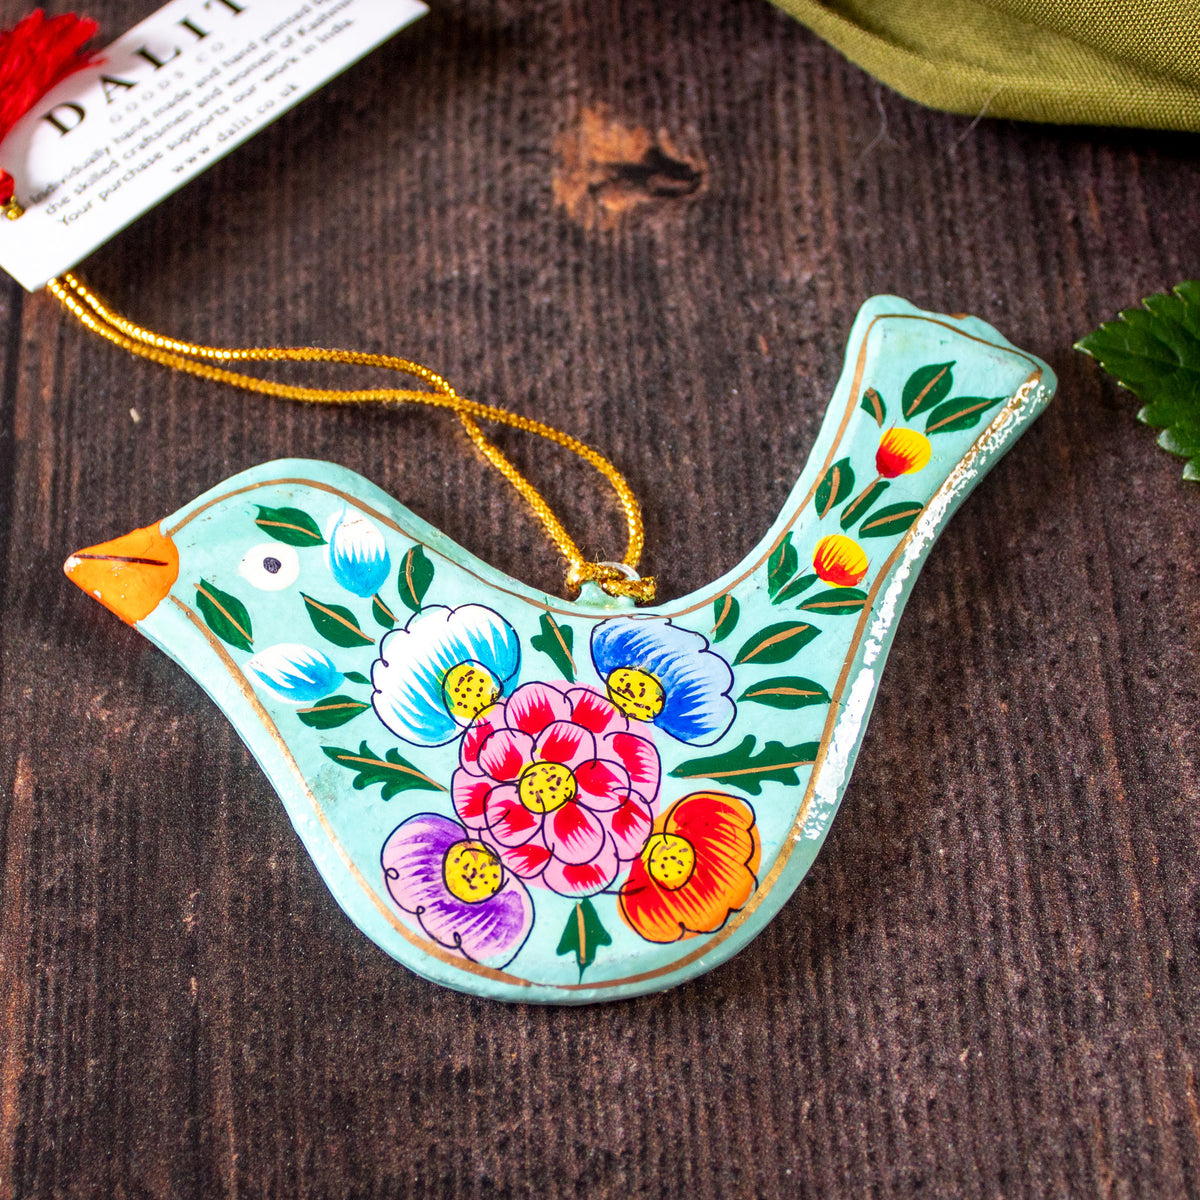 Hanging Spring Decoration - Painted Bird- Turquoise Flowers